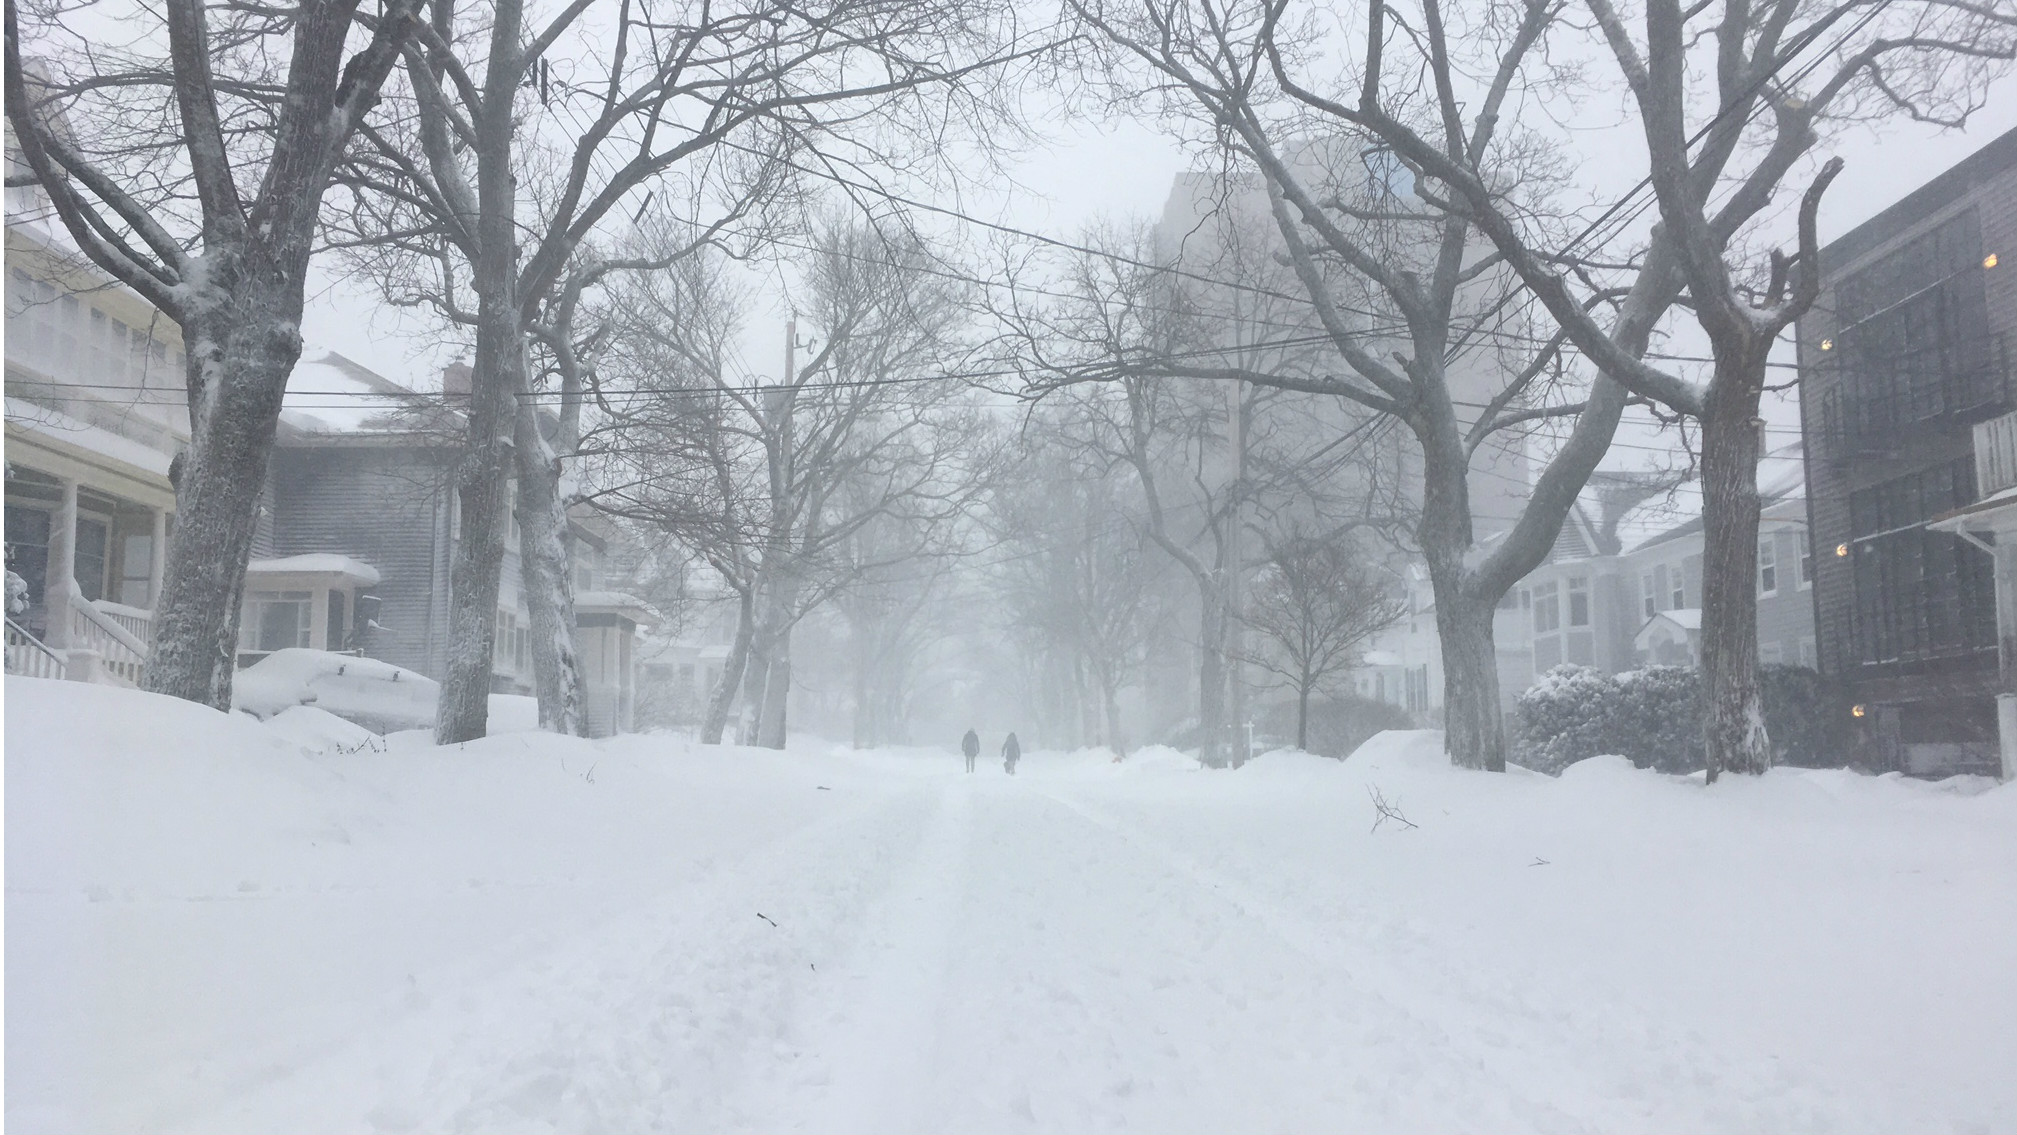 Halifax had 70cm of snow and 100km/h winds, making roads difficult to navigate. 